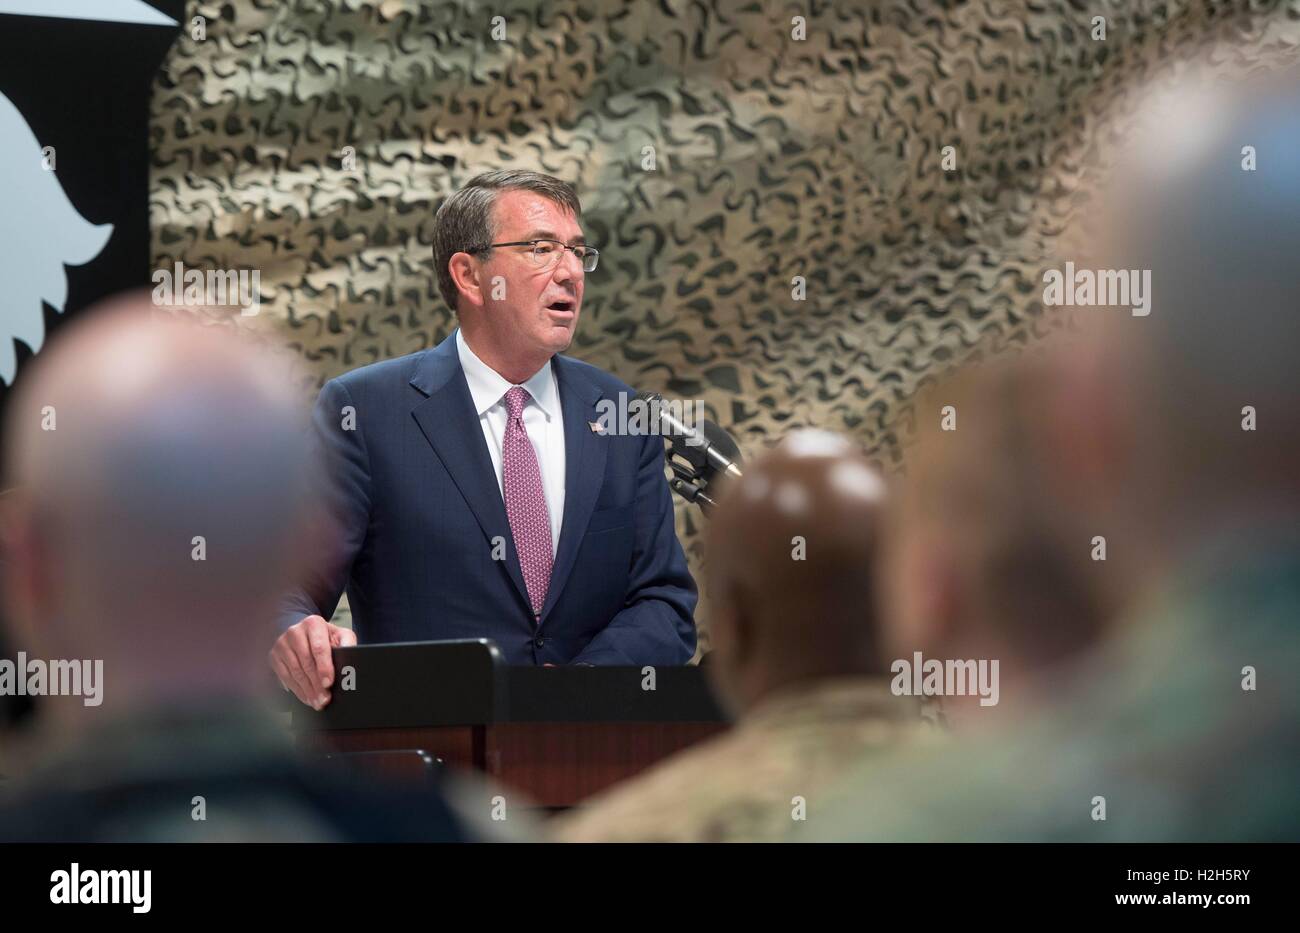 Secretary of Defense Ash Carter speaks to troops during a visit July 11 2016 in Baghdad, Iraq. Carter is in Baghdad to discuss Operation Inherent Resolve. Stock Photo